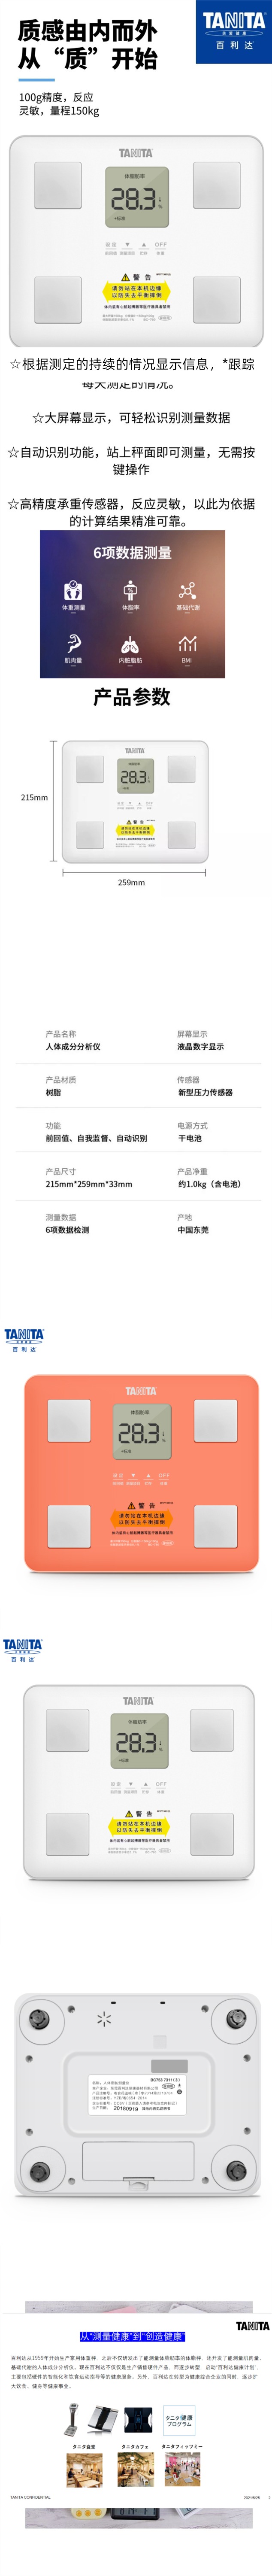 Tanita / Belita The new Japan household Body fat scale Weighing scale Electronic balance Body scale accurate BC-760